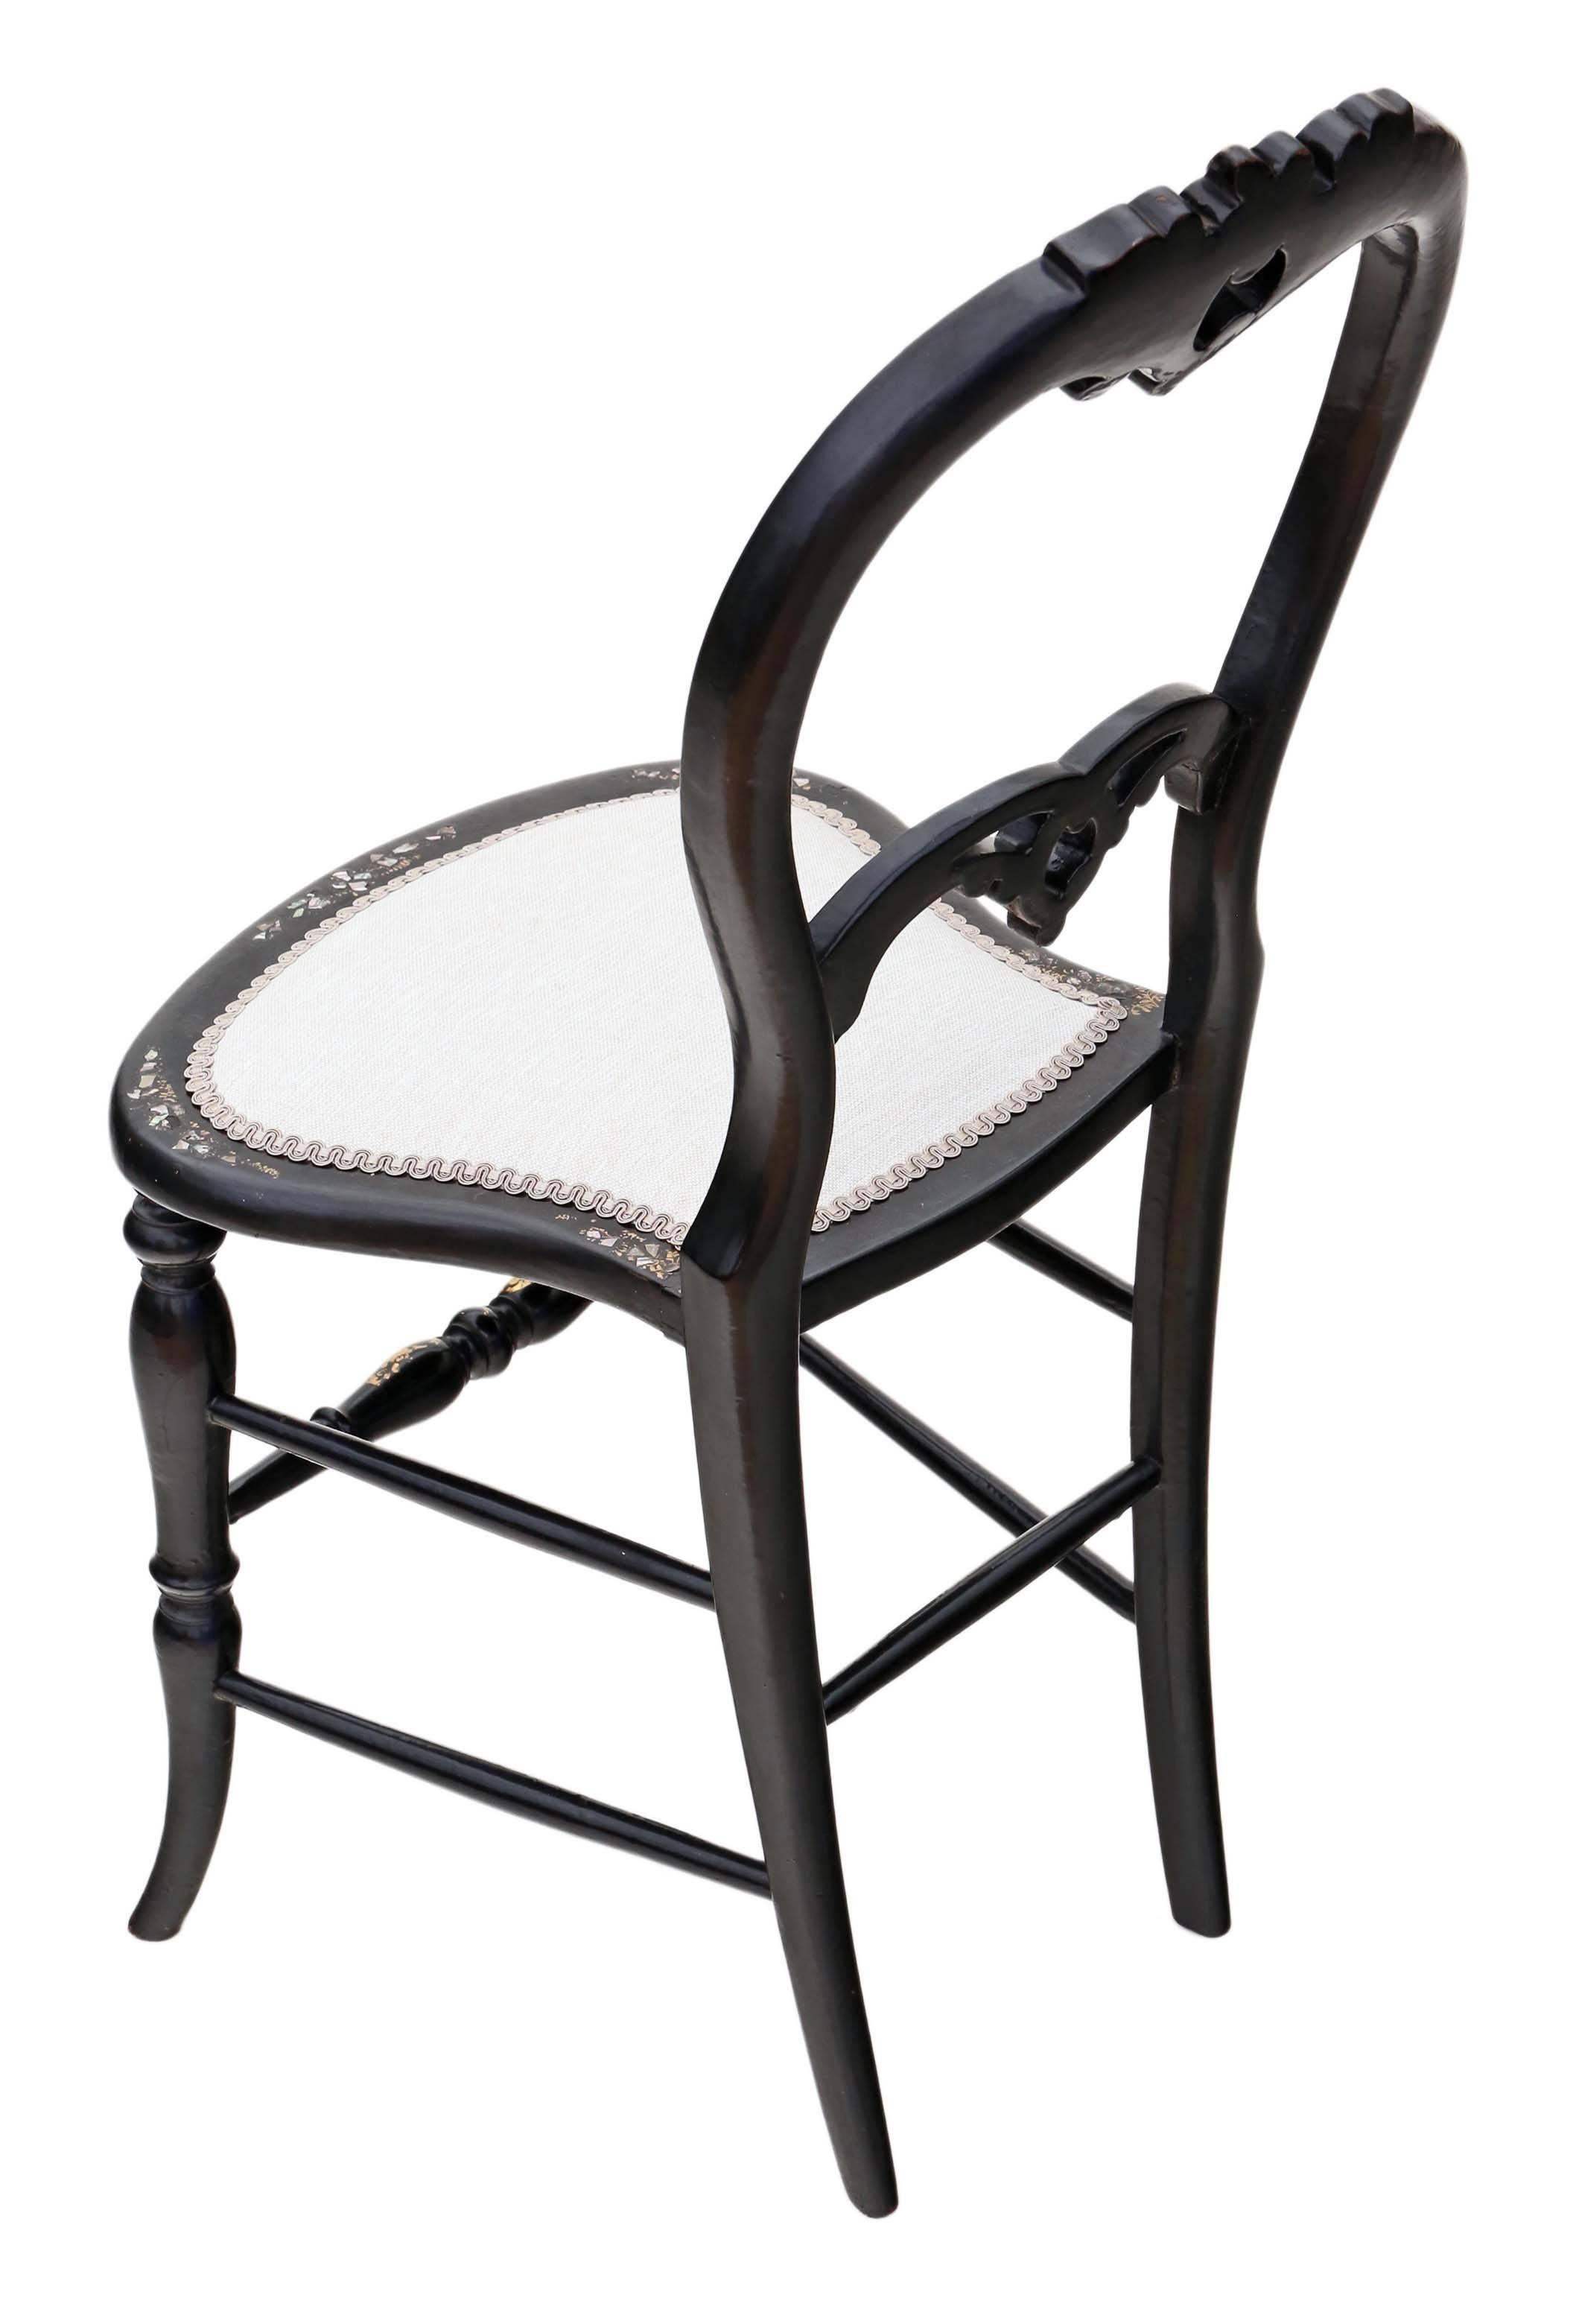 British Antique Rare Victorian, circa 1890 Mother-of-Pearl Inlaid Bedroom Chair Side For Sale